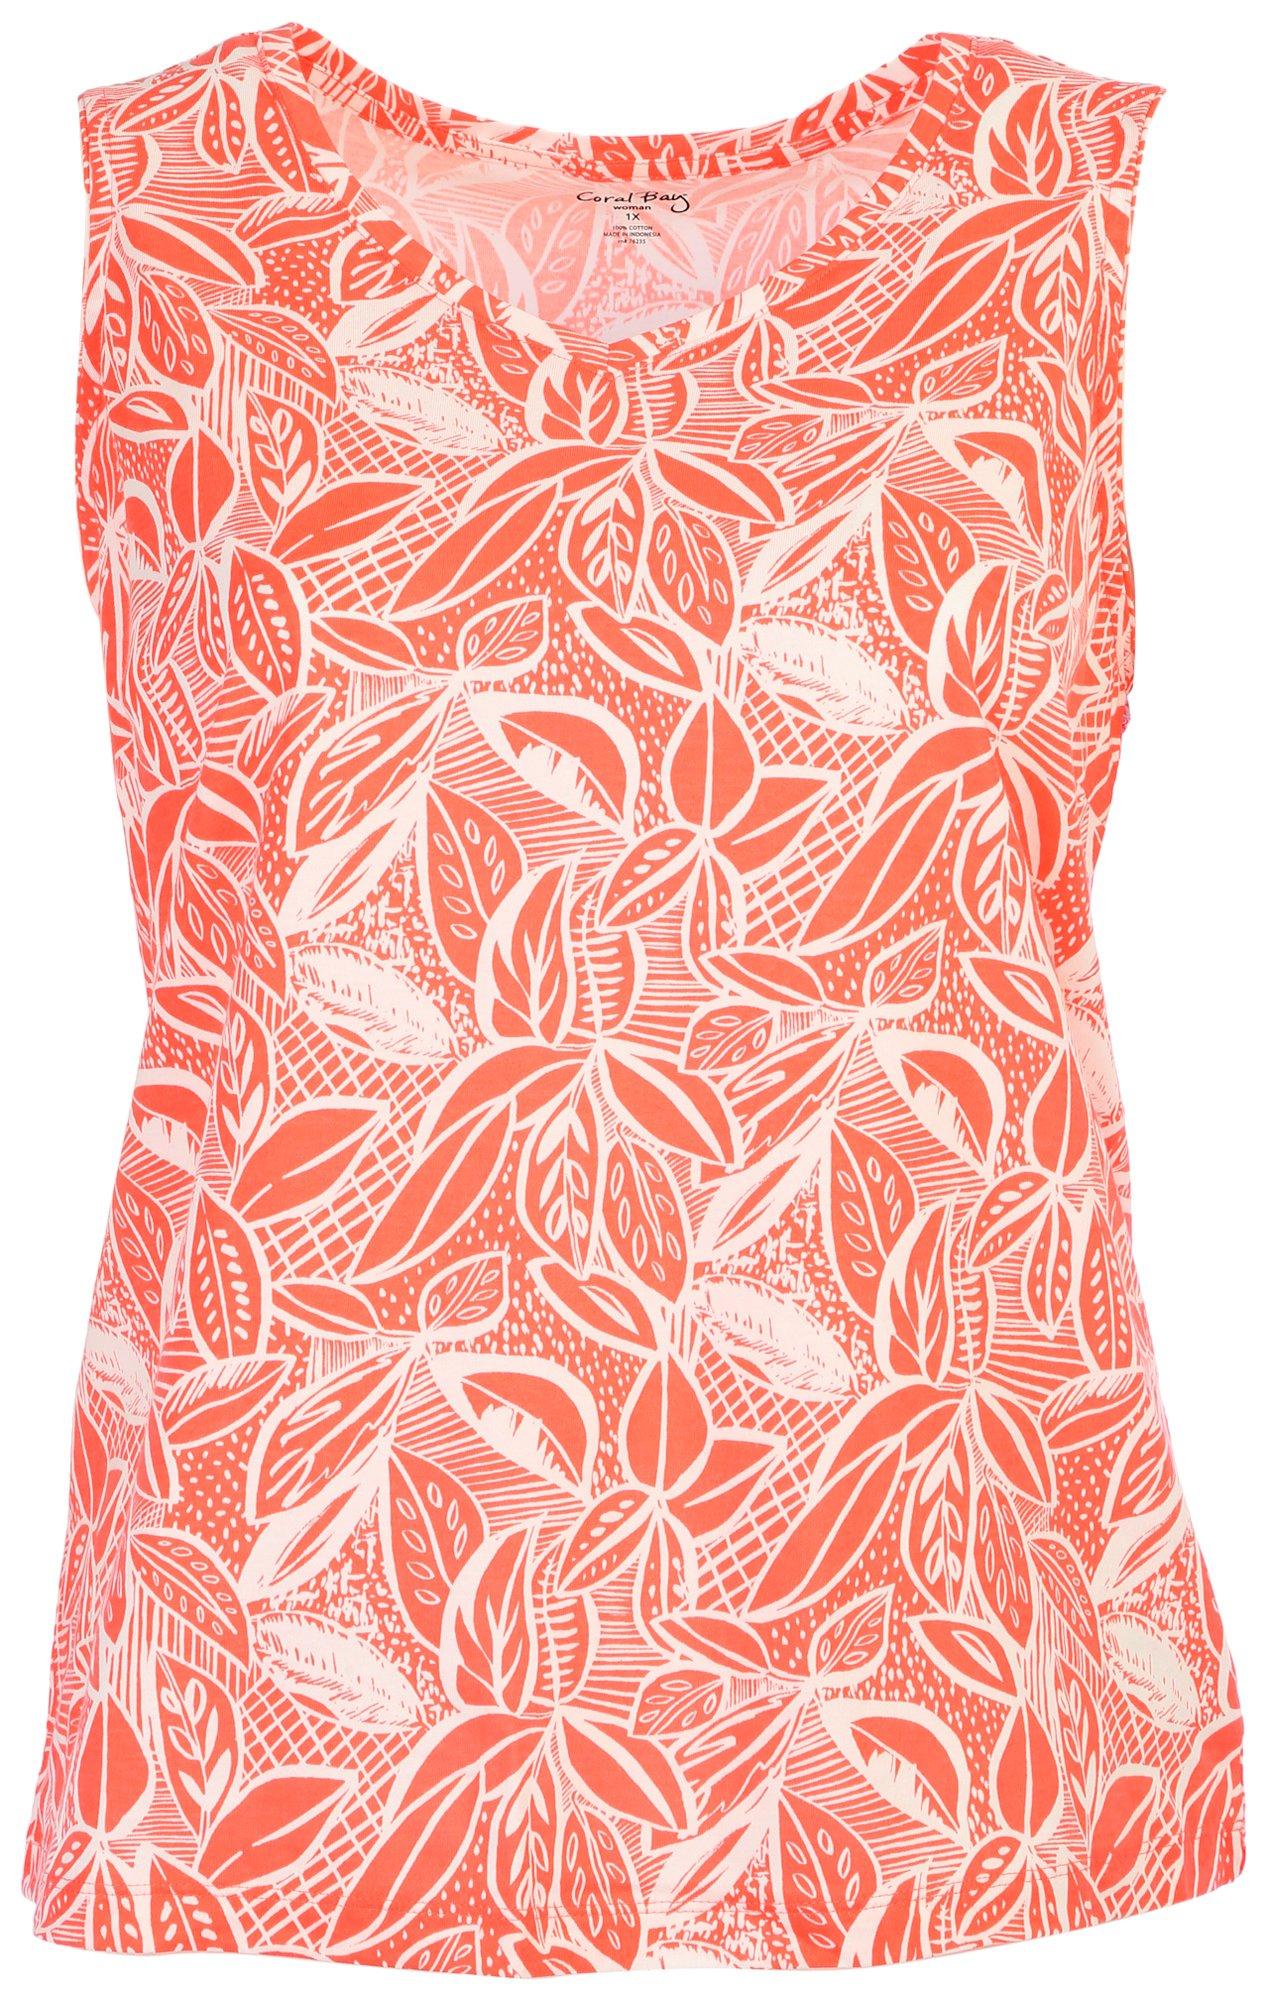 Coral Bay Plus Abstract Print V-Neck Sleeveless Top